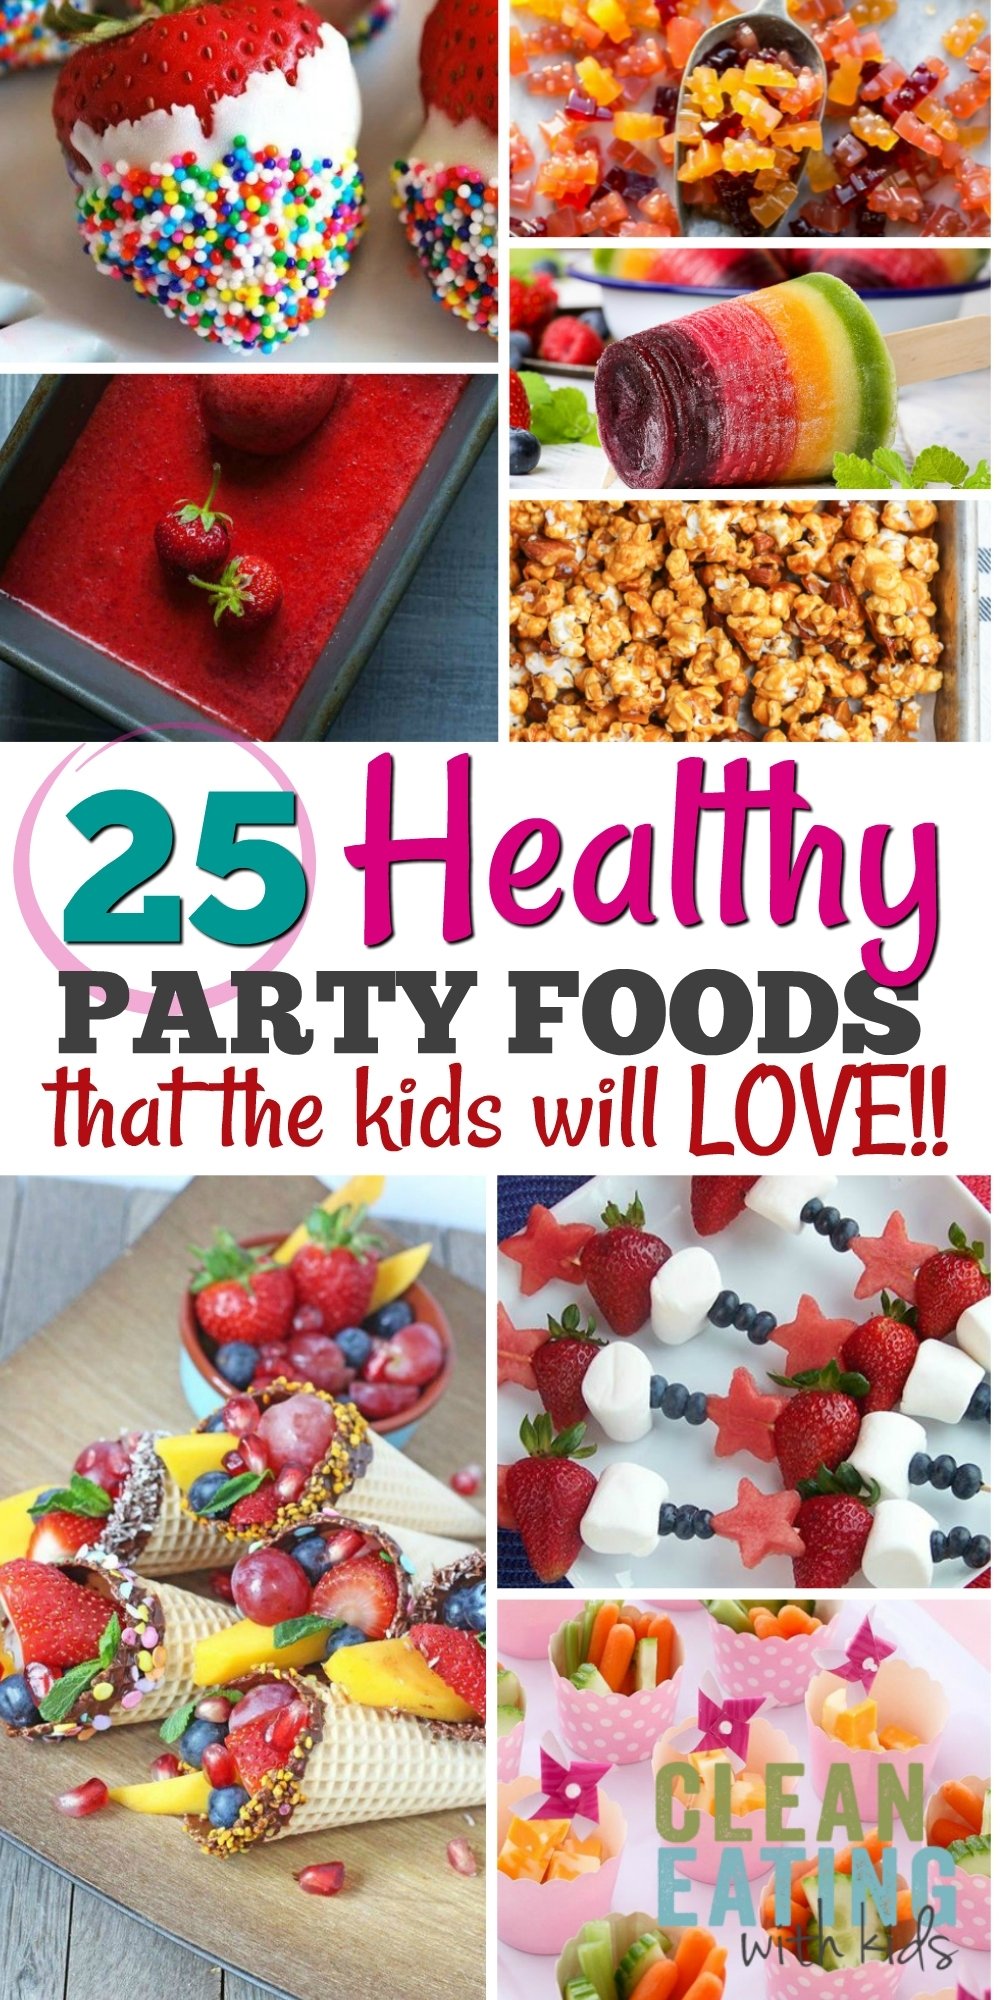 10 Nice Cheap Food Ideas For Birthday Parties 2022